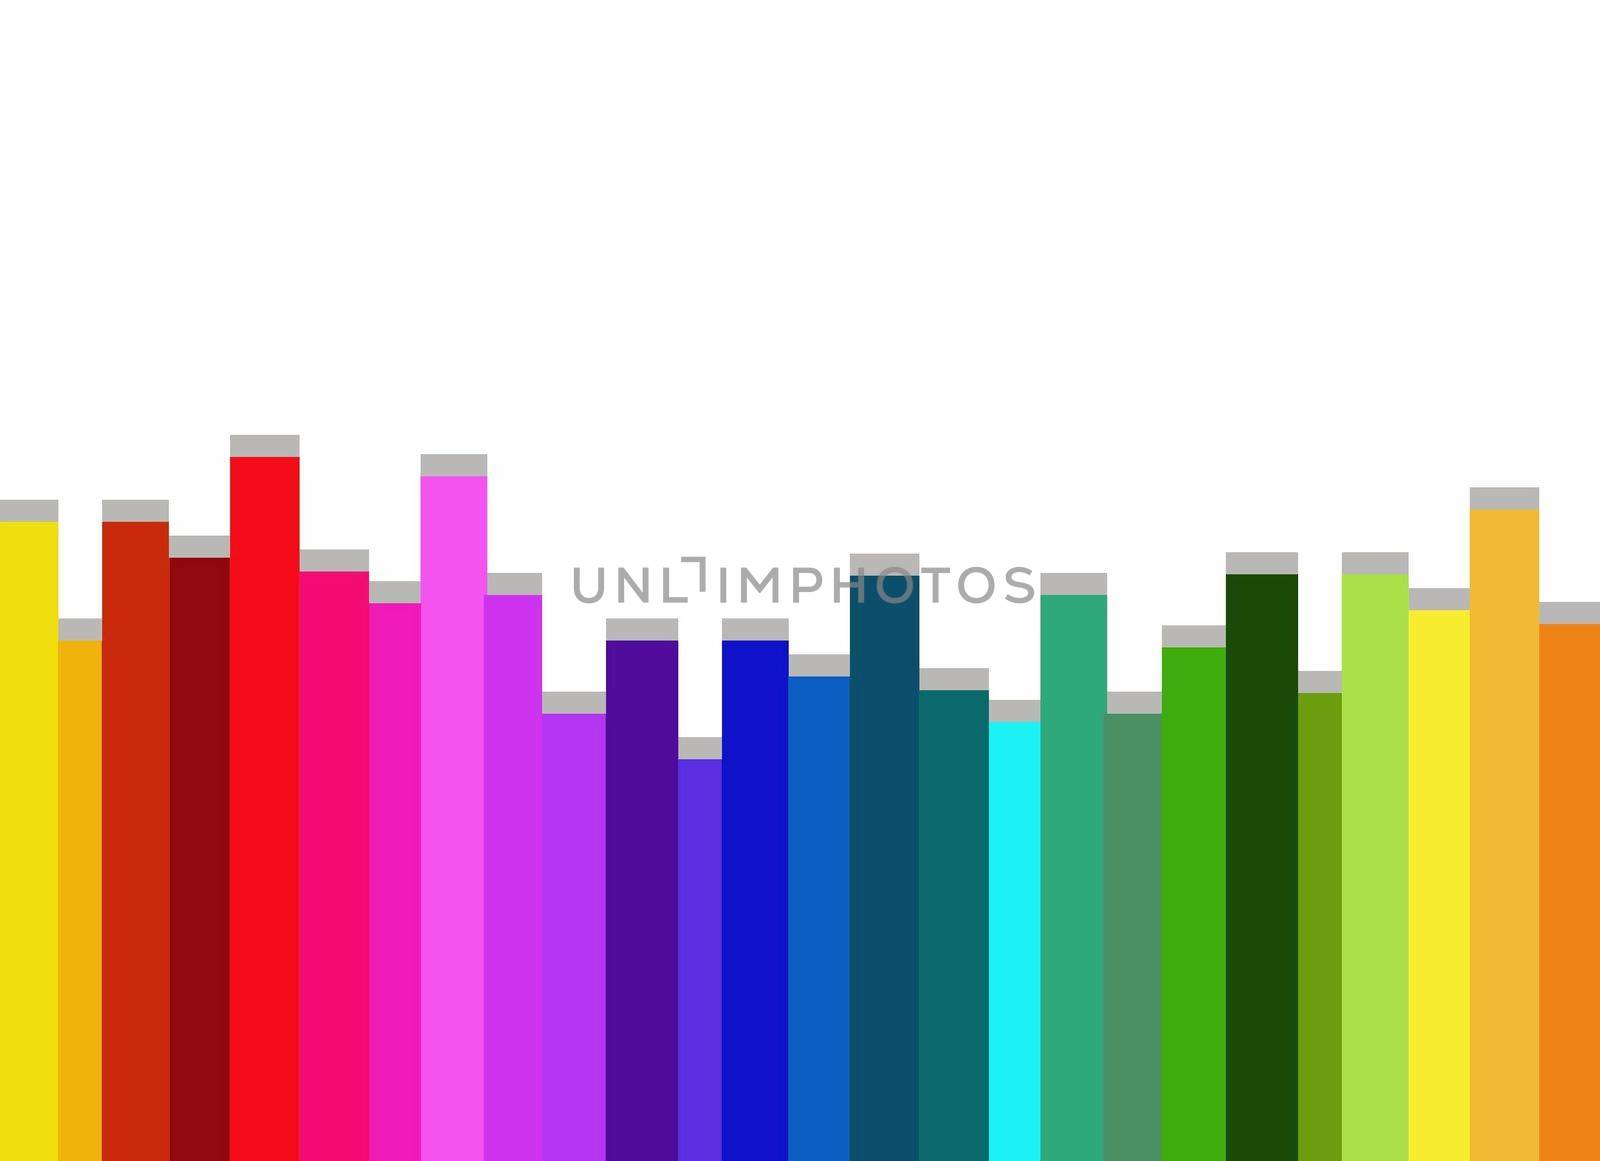 Colorful spectrum background, rainbow abstract by rakoptonLPN